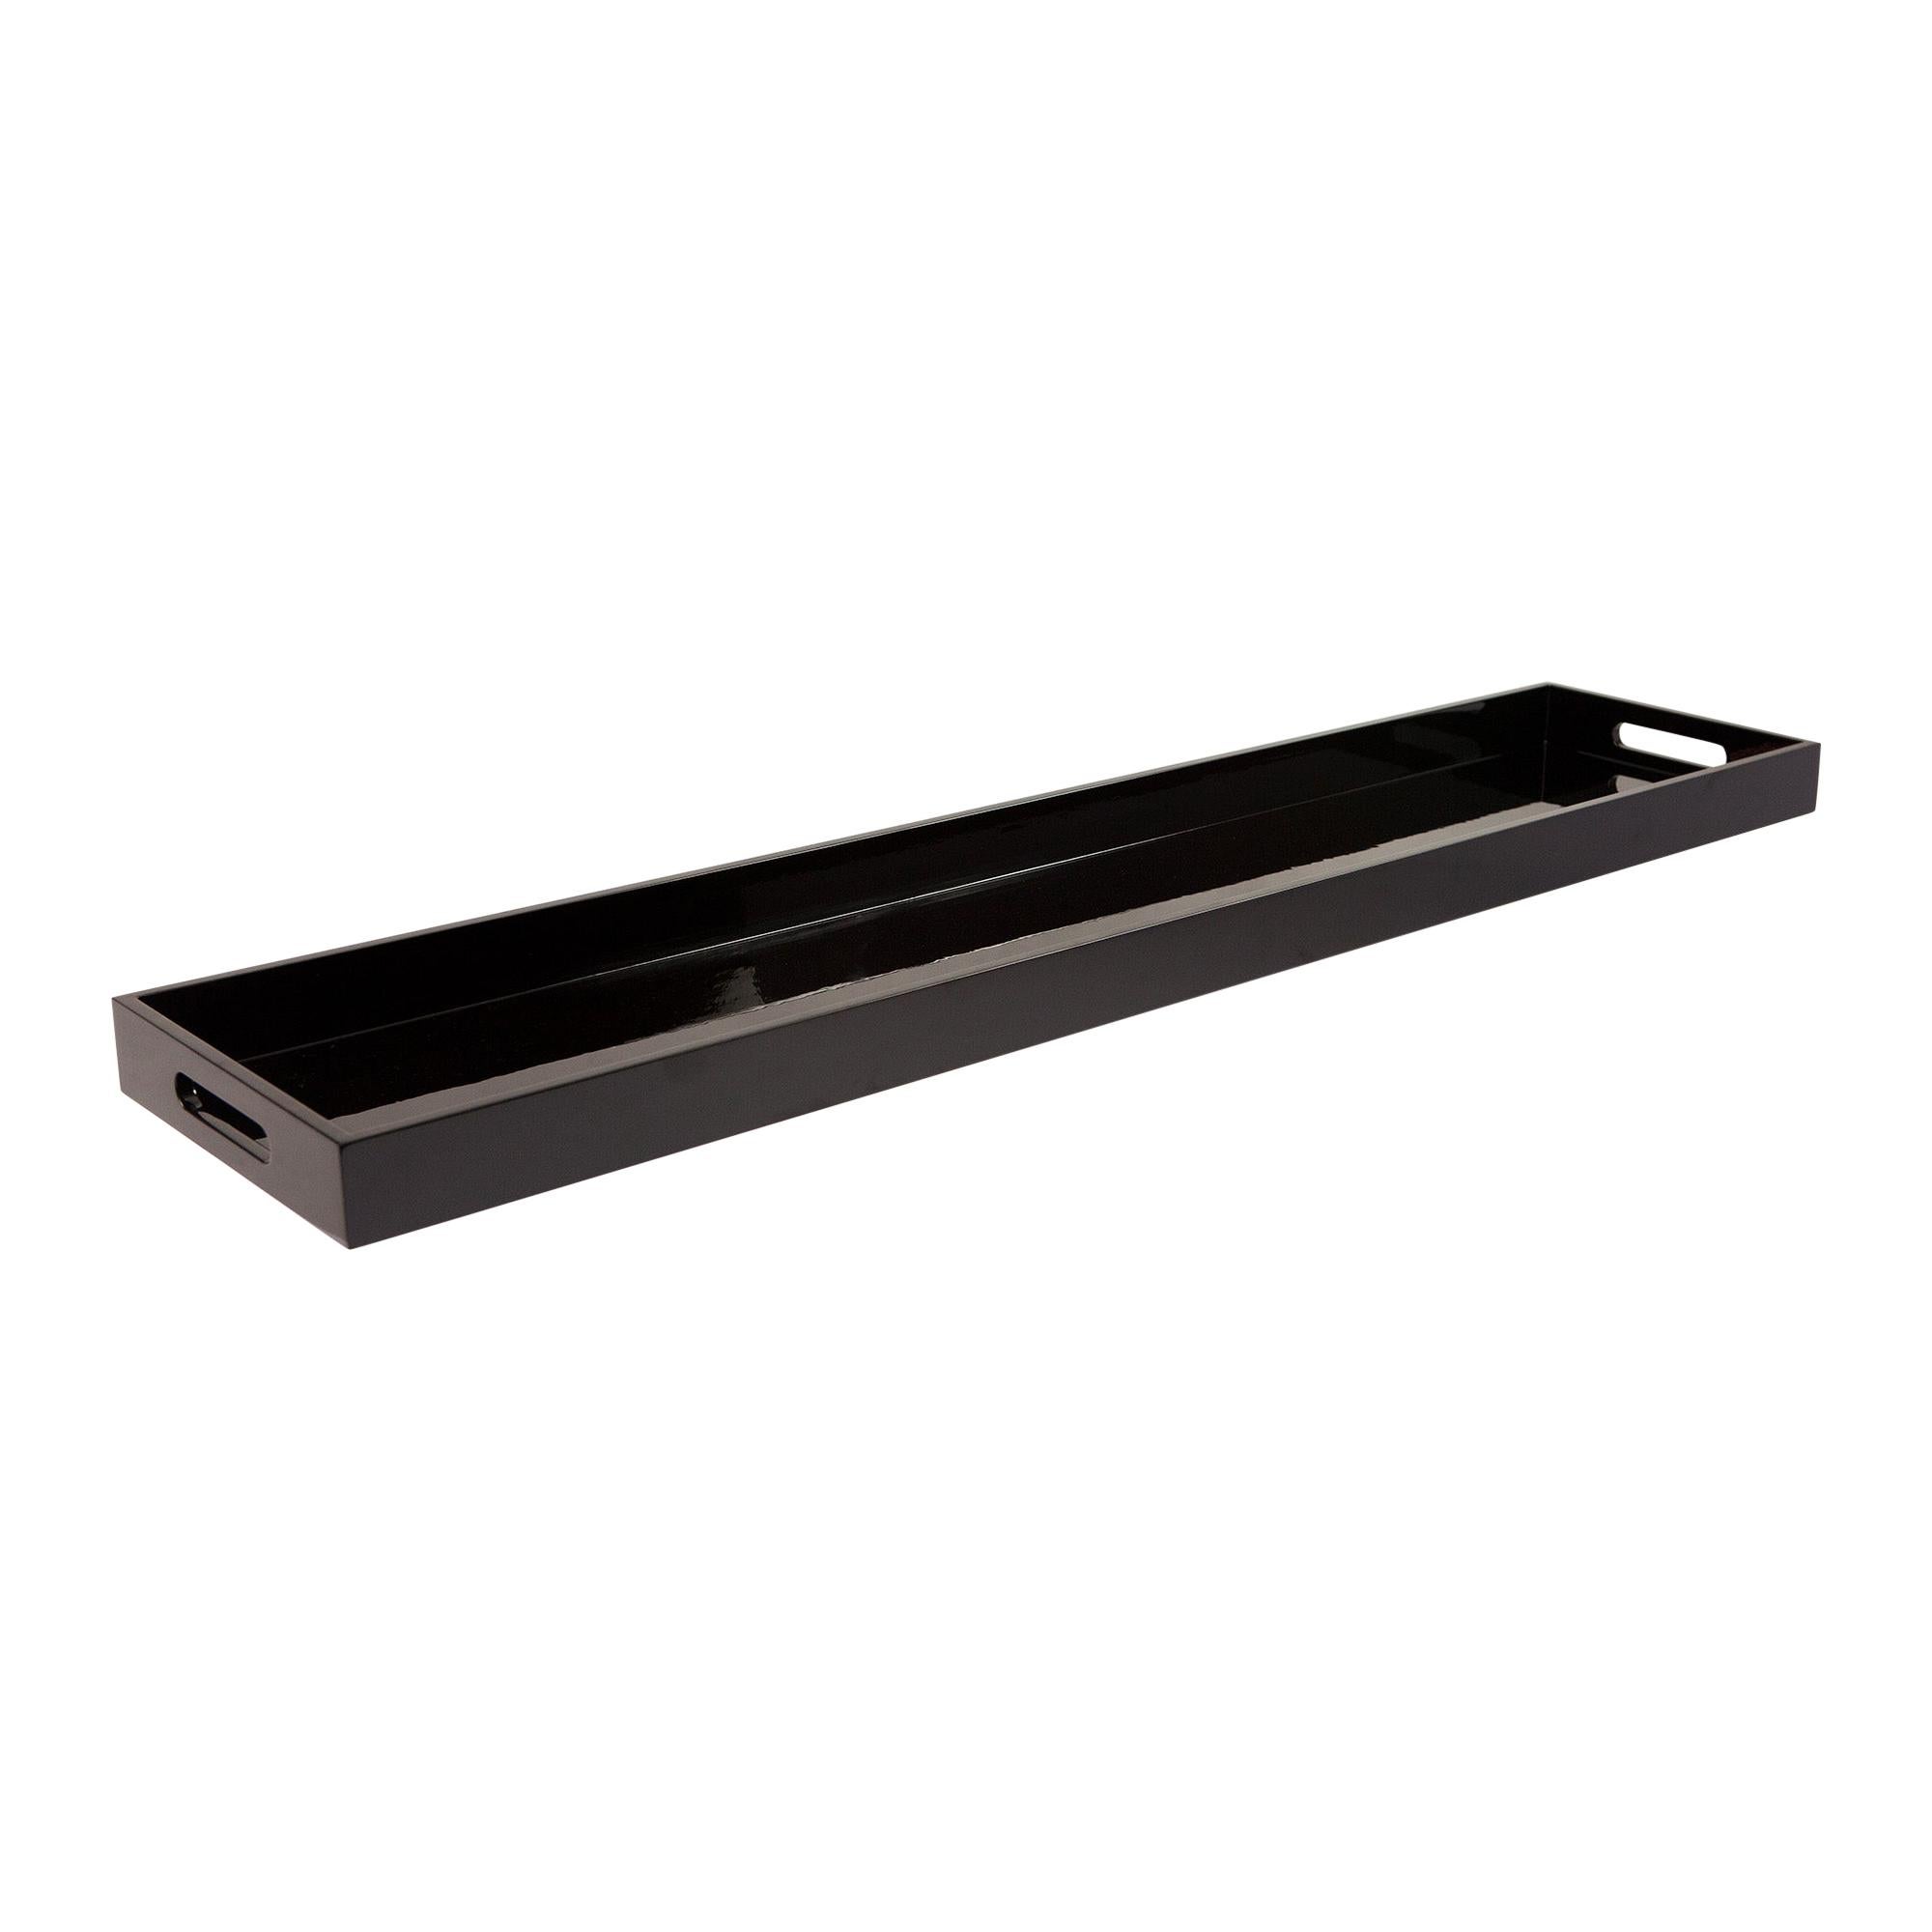 Black (QR-16960.BLACK.0) Shira Extra Long Lacquered Tray by CuratedKravet